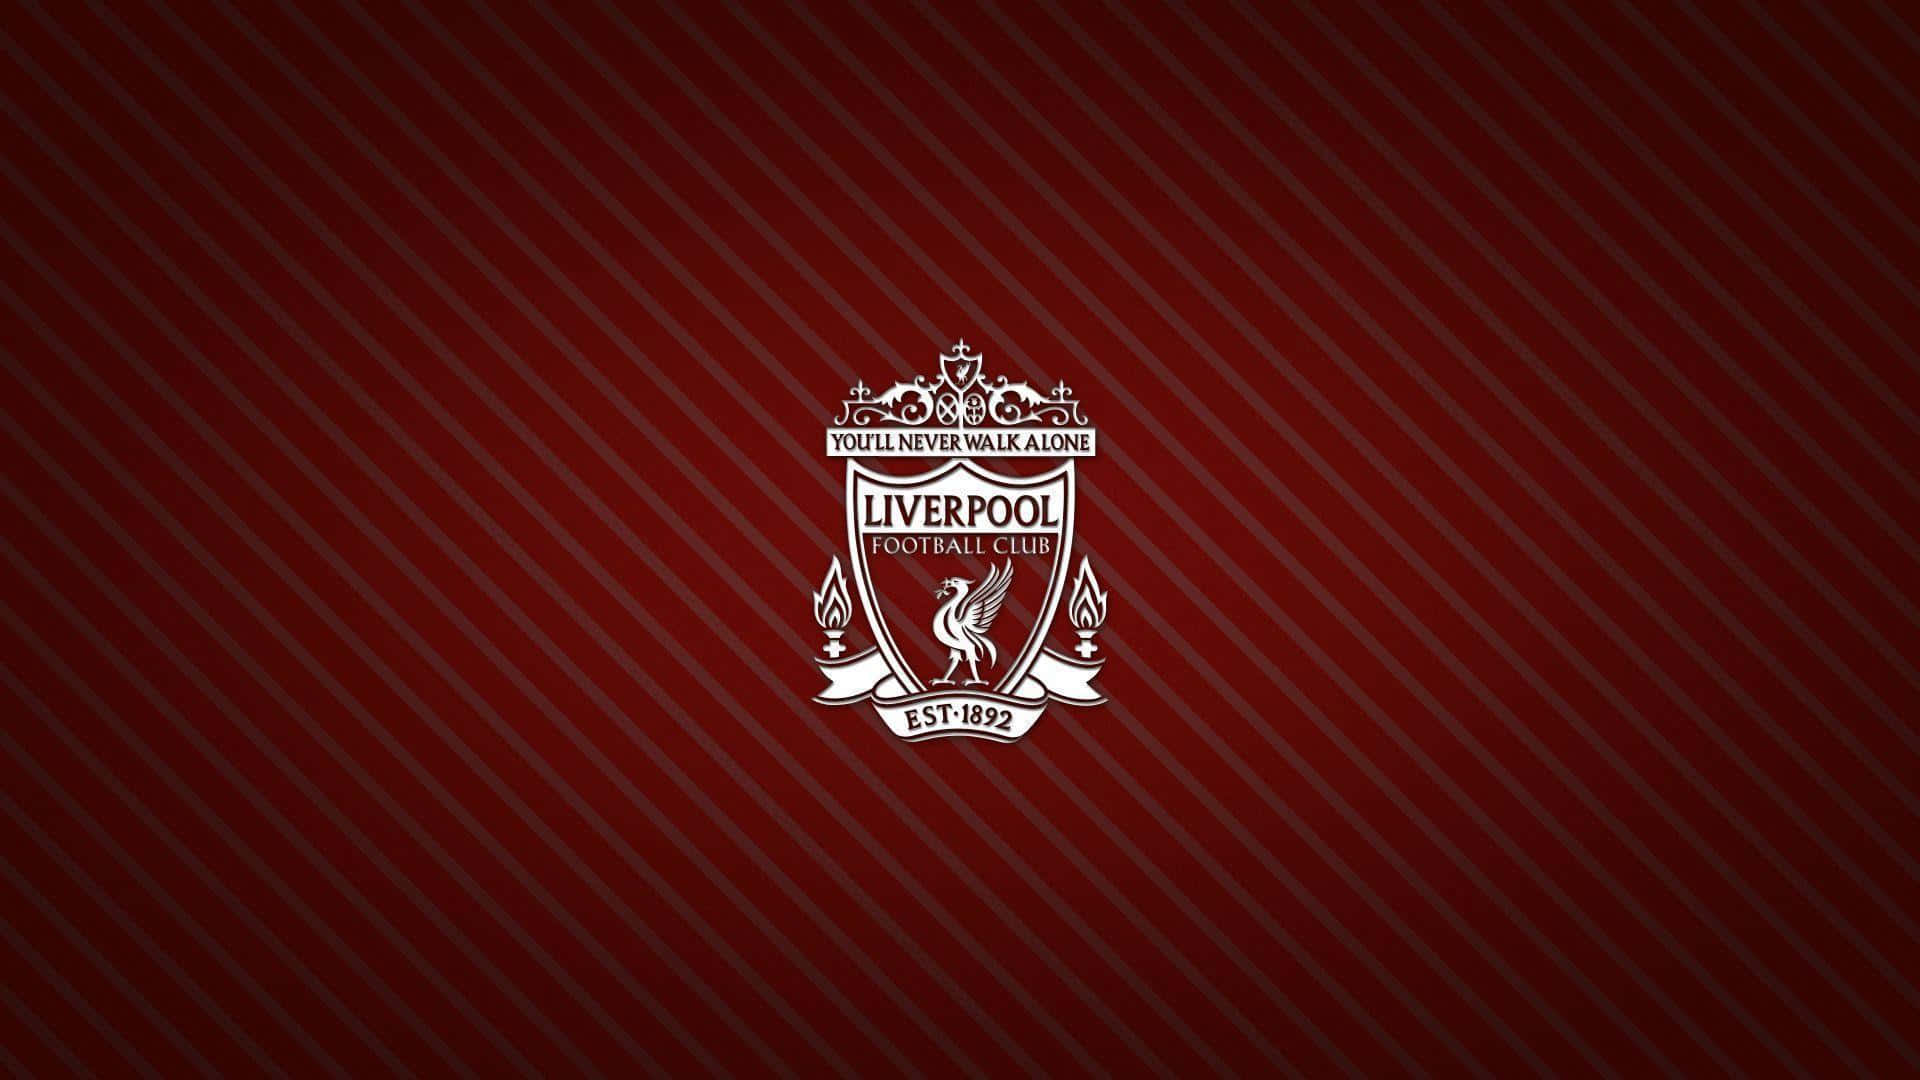 The Liverpool Logo On A Red Background Wallpaper